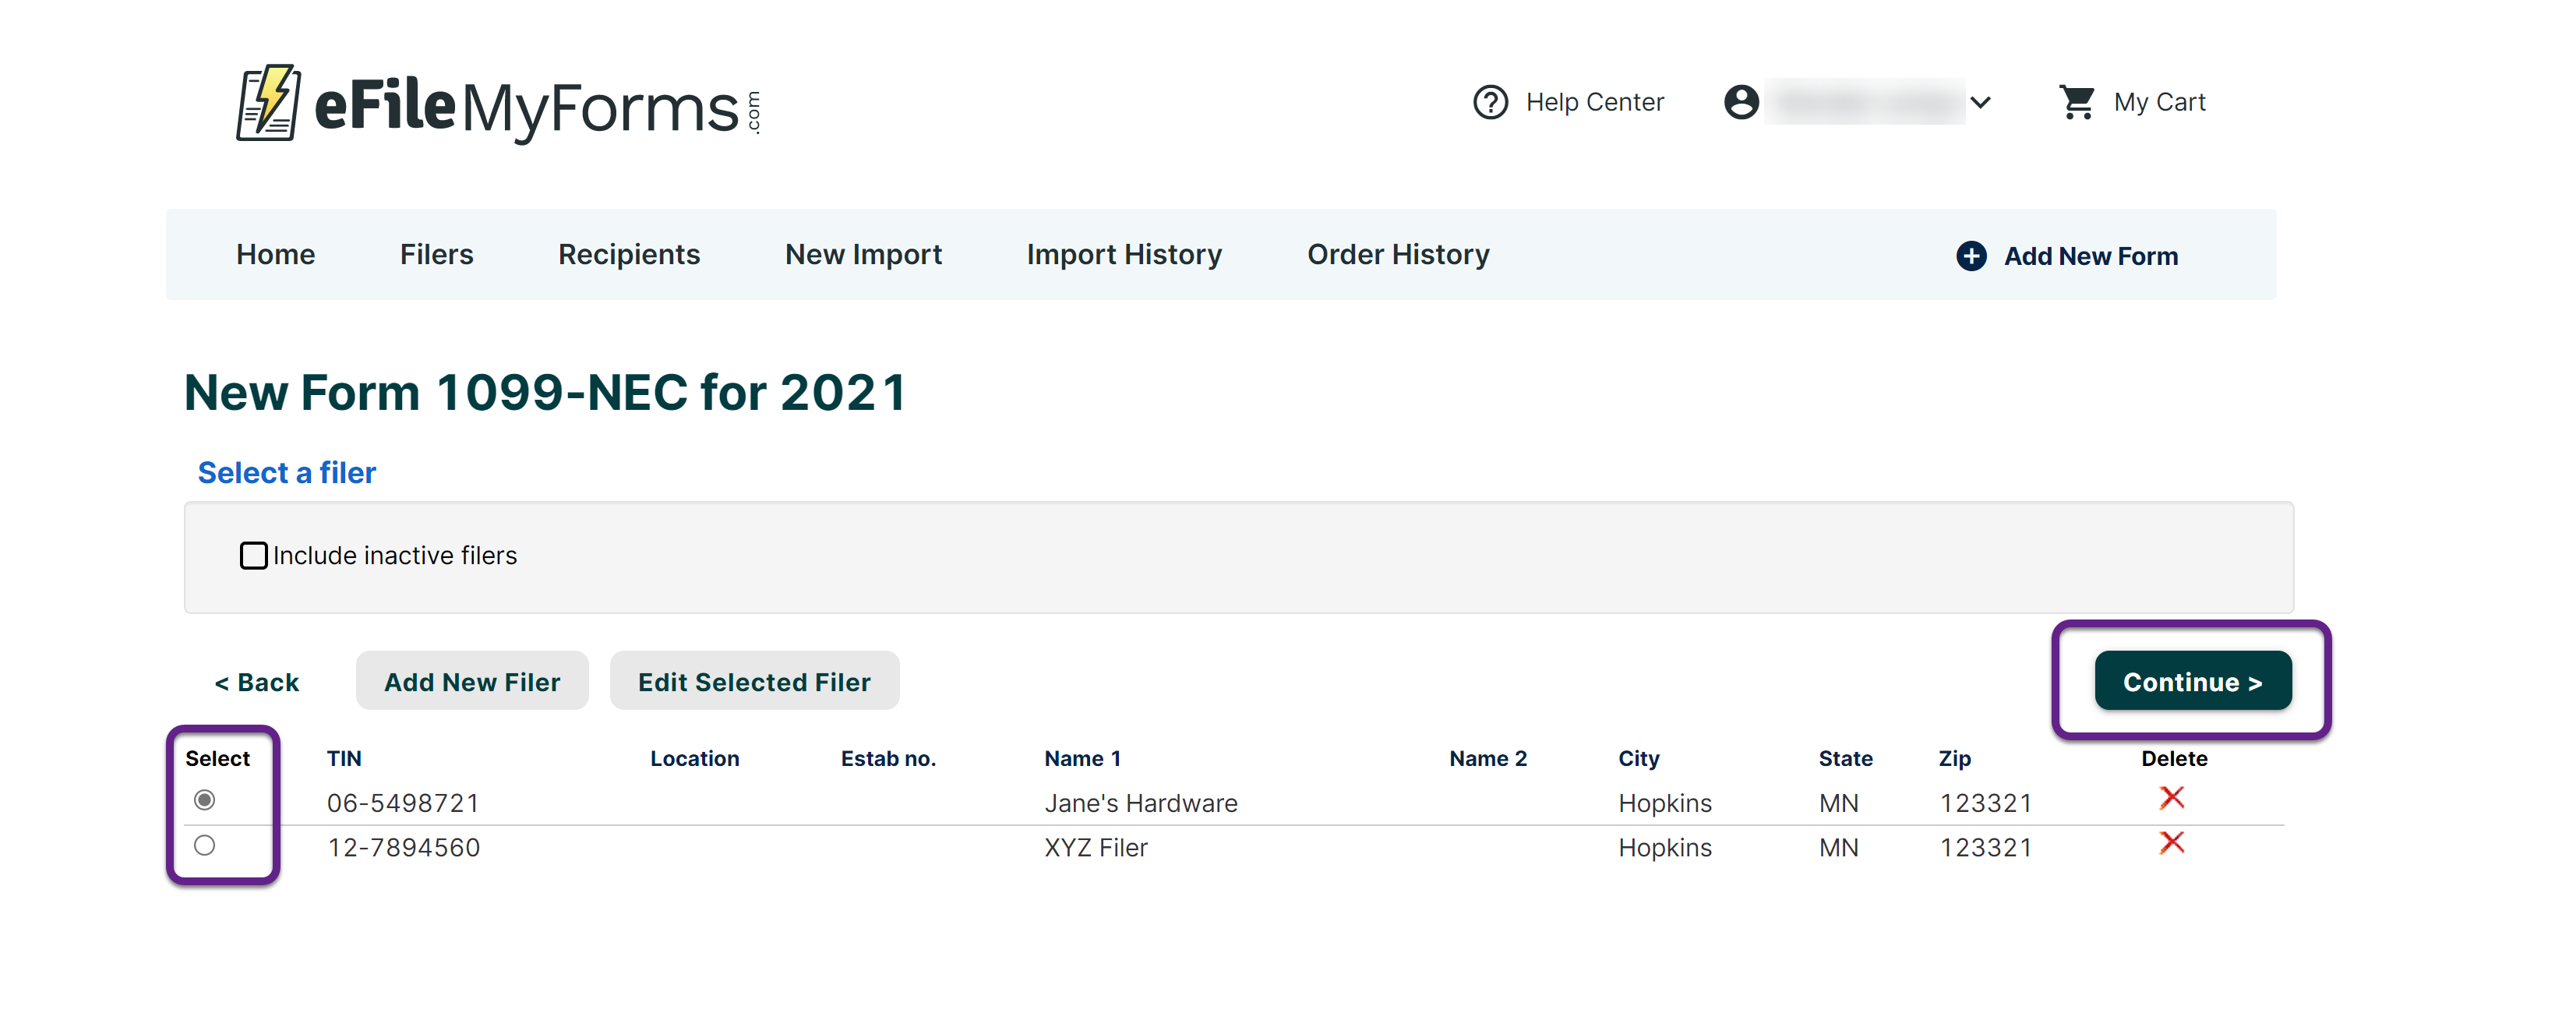 Image of the New Form 1099-NEC for 2021 page with callouts on the Select column and Continue button.